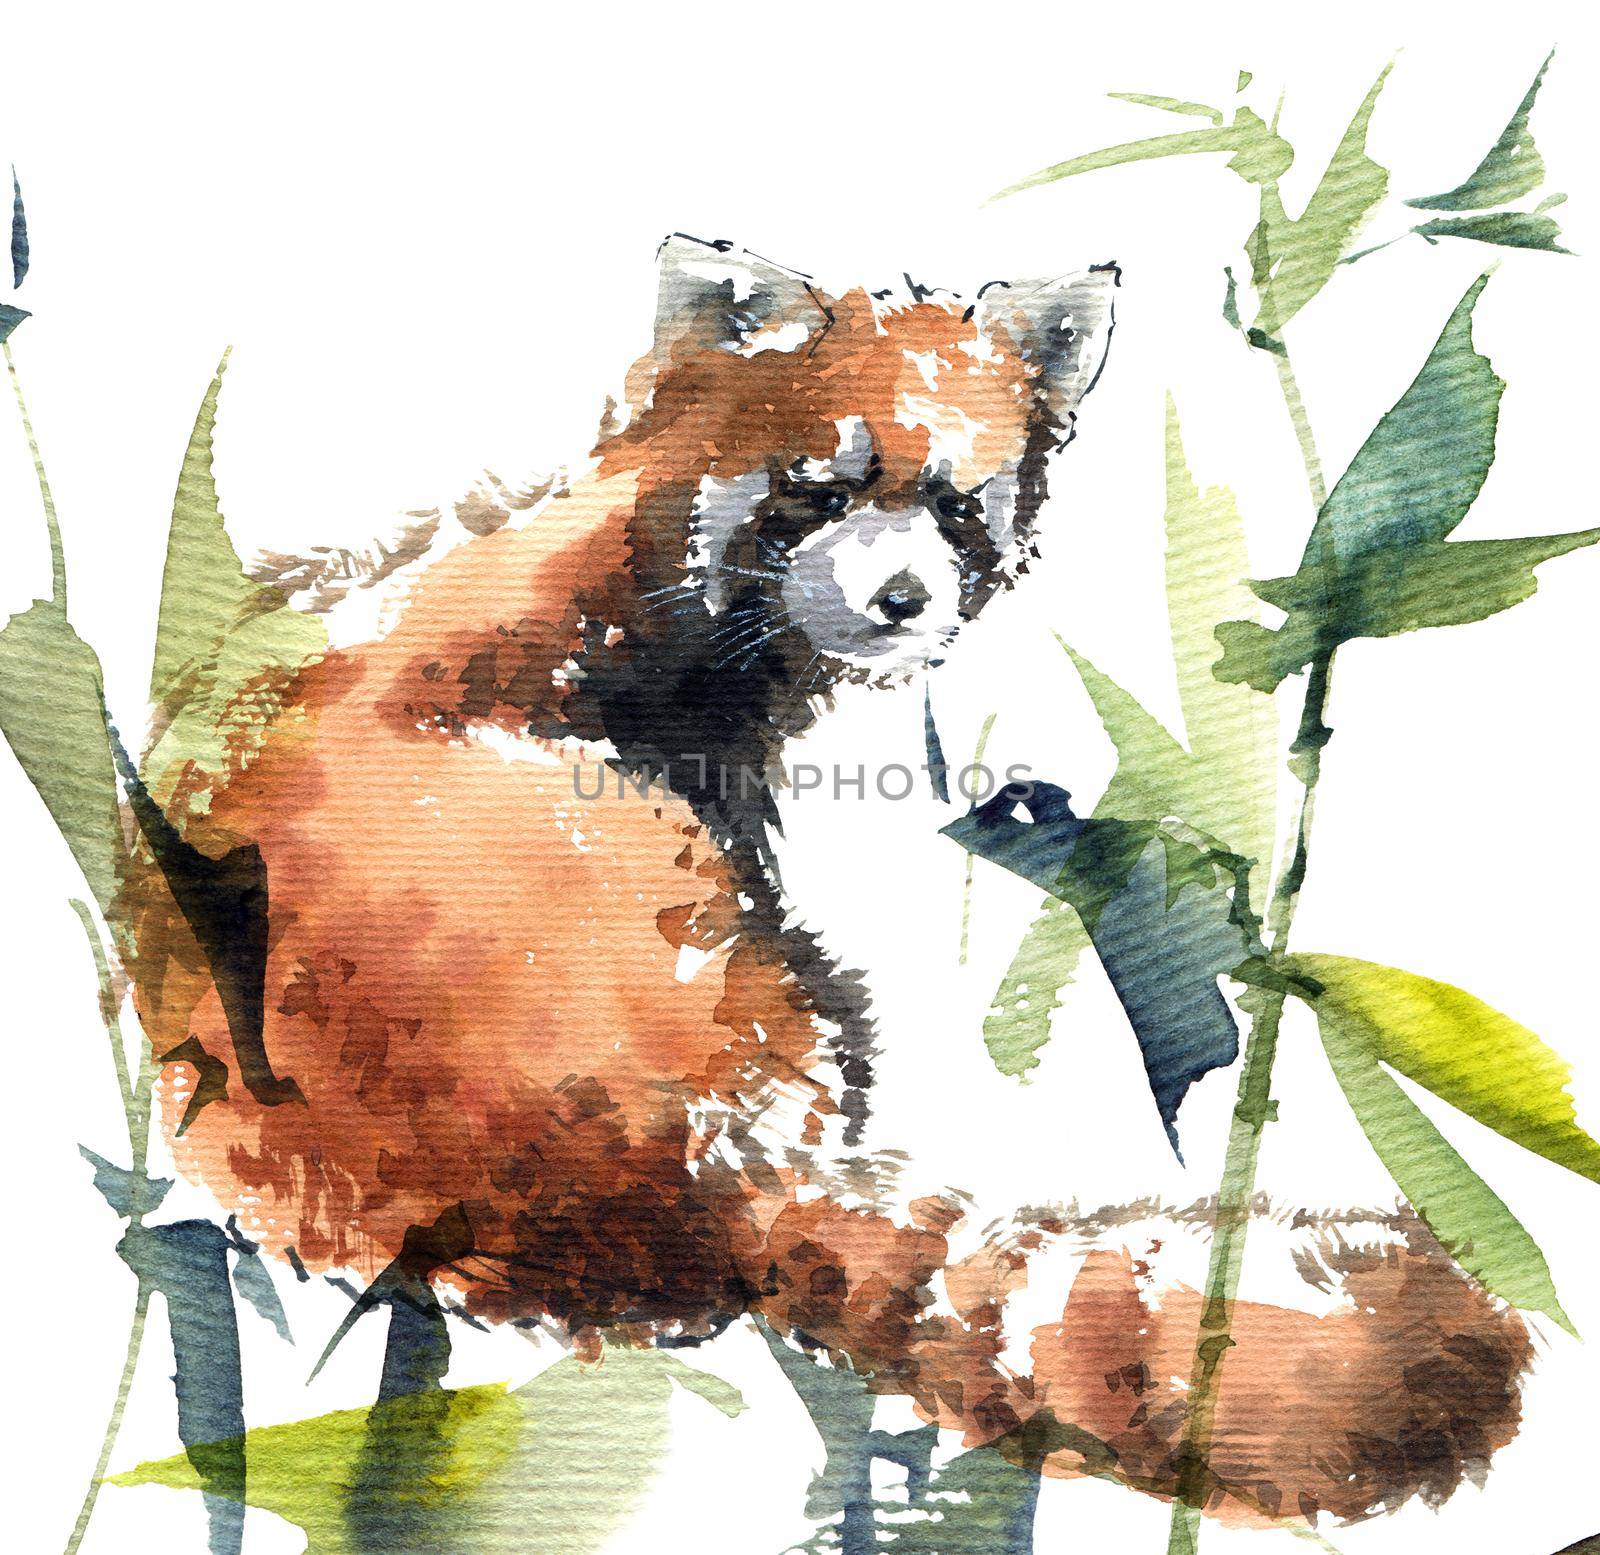 Watercolor illustration of little panda among bamboo thickets. Artistic painting.